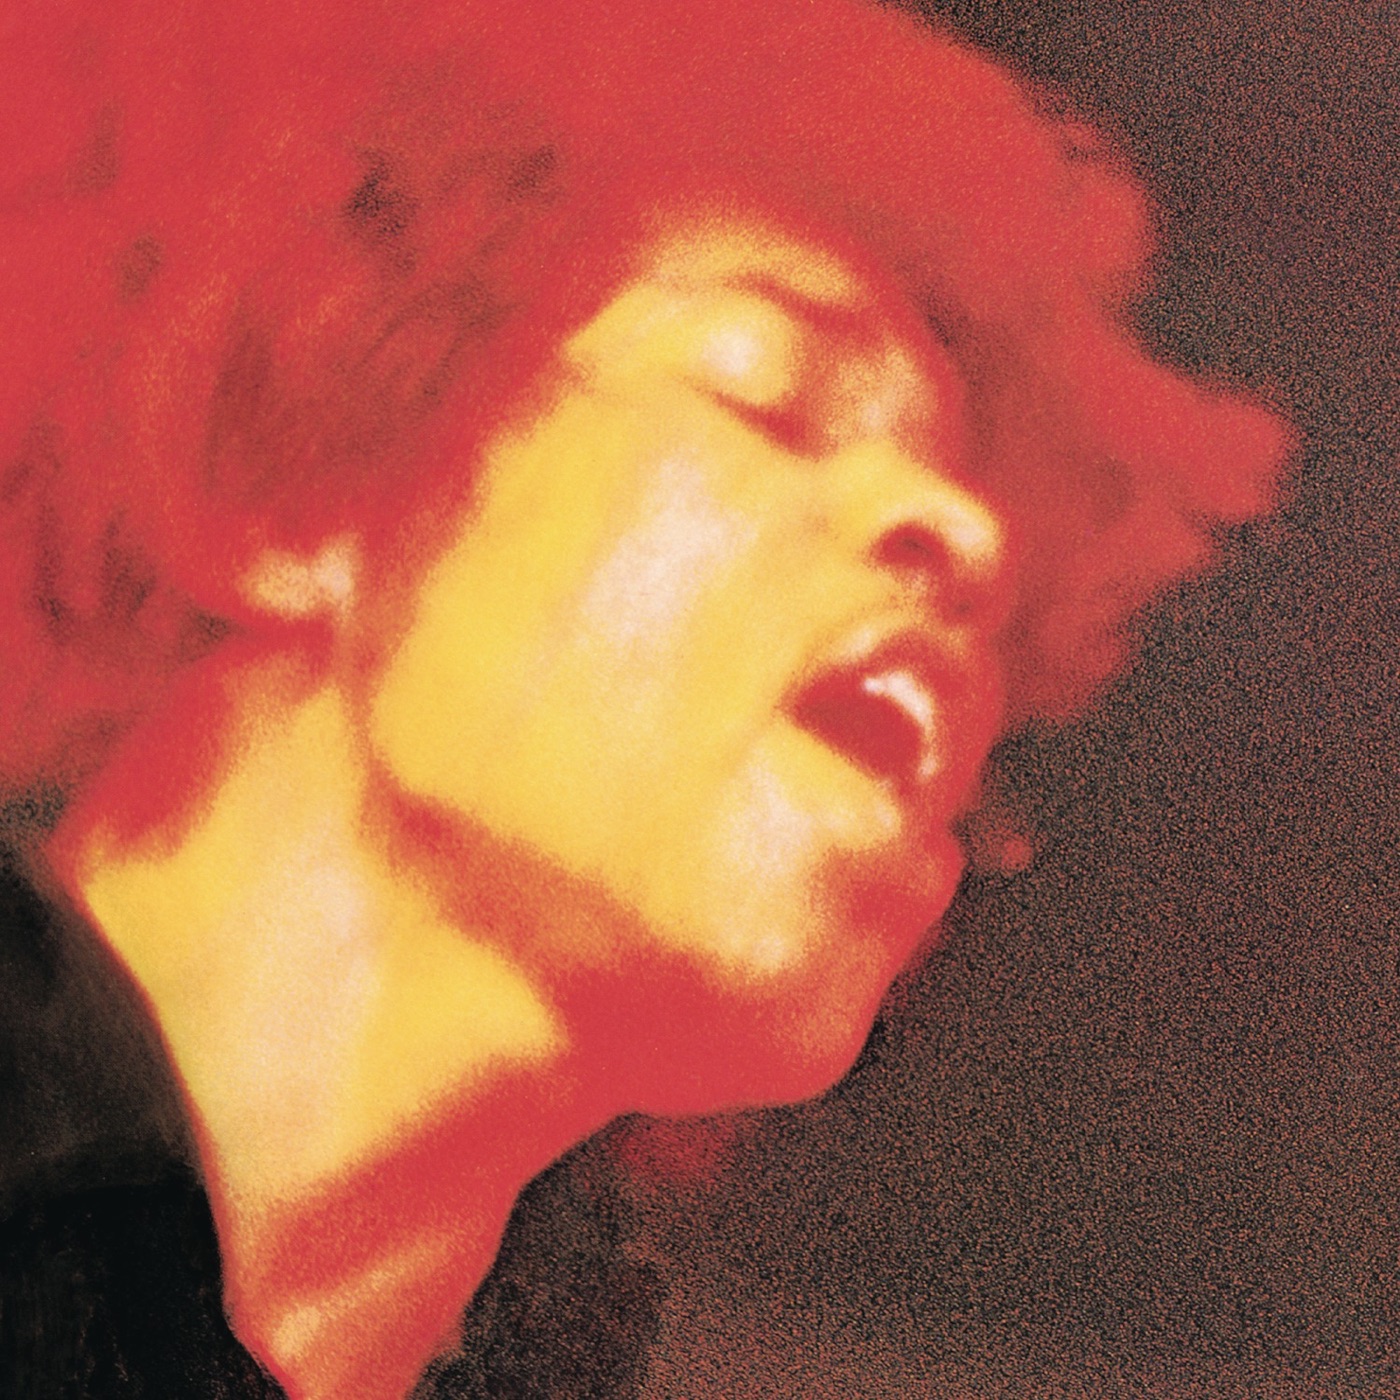 Electric Ladyland by The Jimi Hendrix Experience